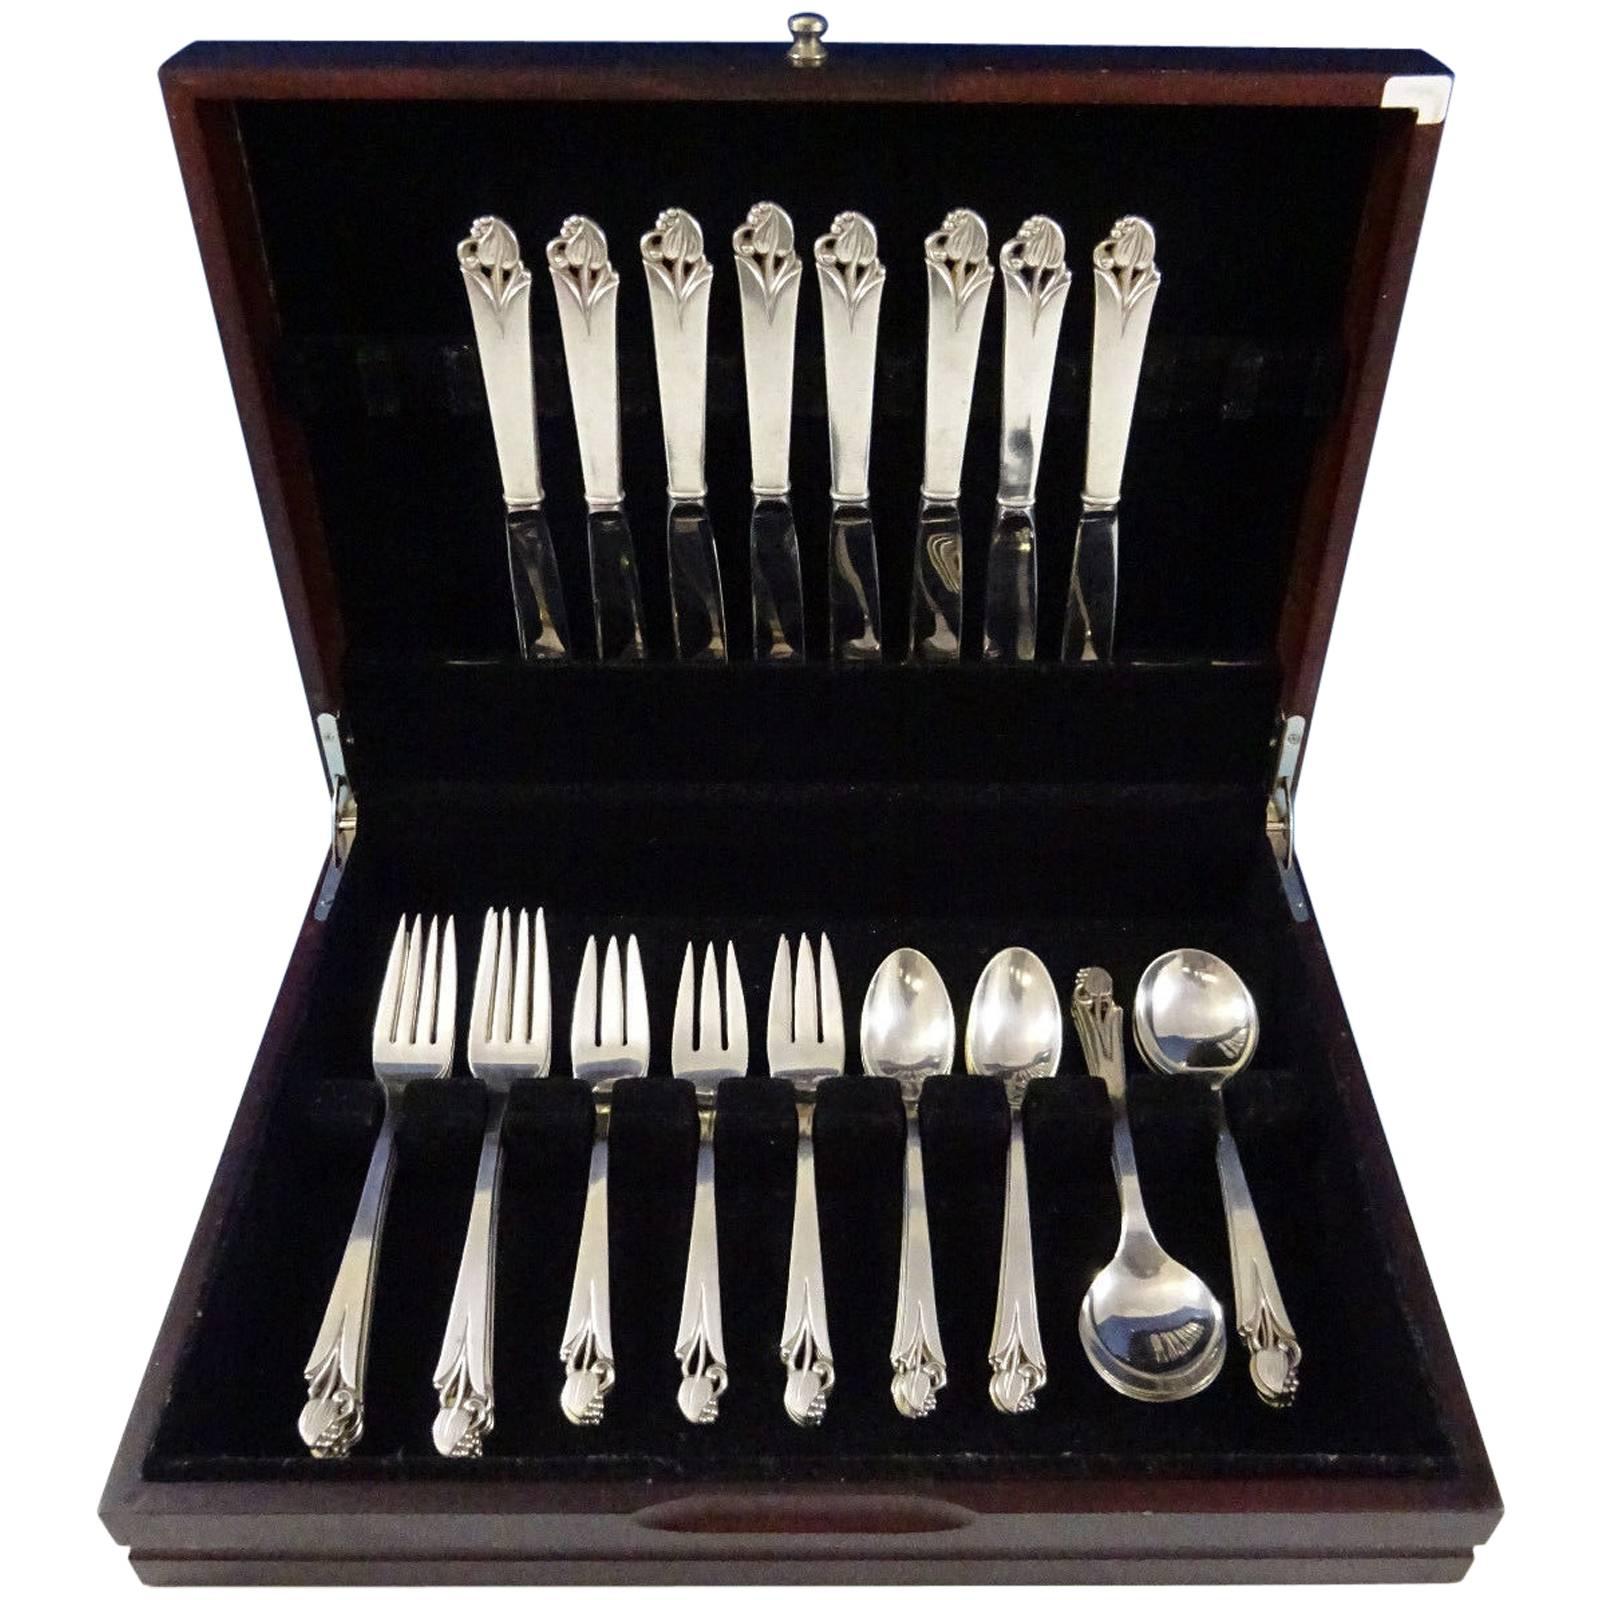 Woodlily (Glossy) by Frank Smith sterling silver flatware set, 40 pieces. This graceful pattern features a 